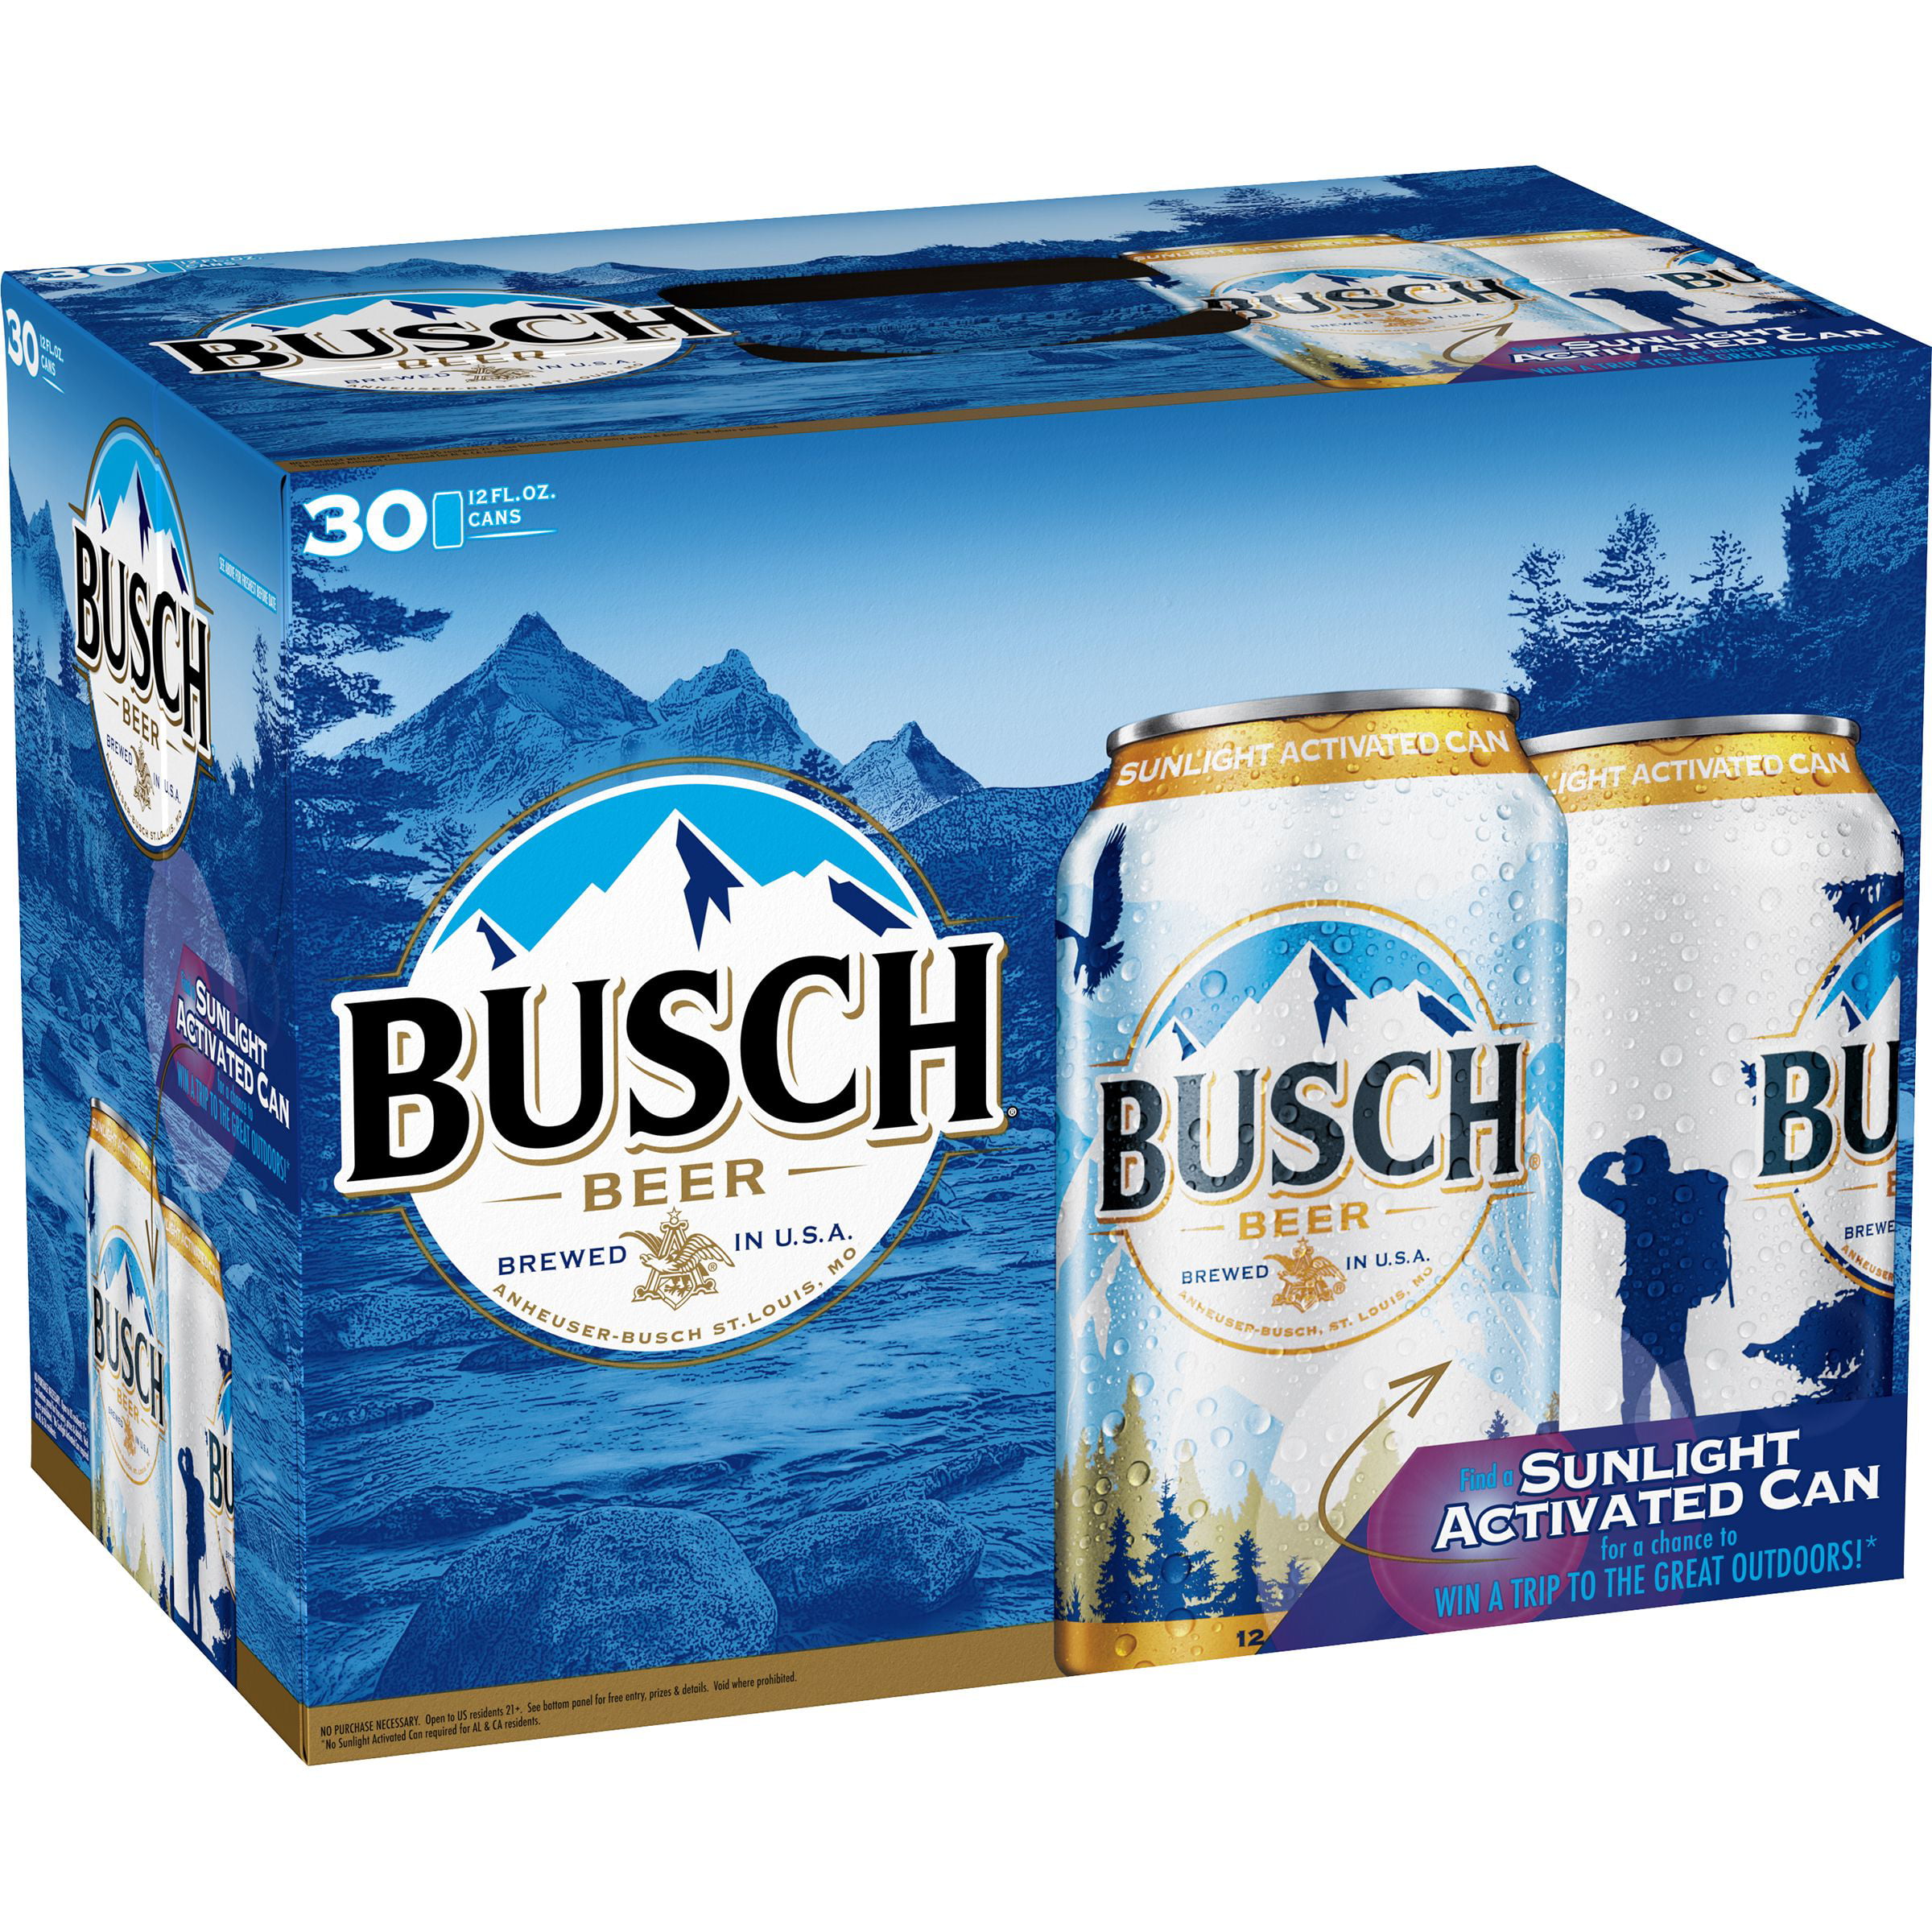 3 Rebate Form For Busch 30 Pack